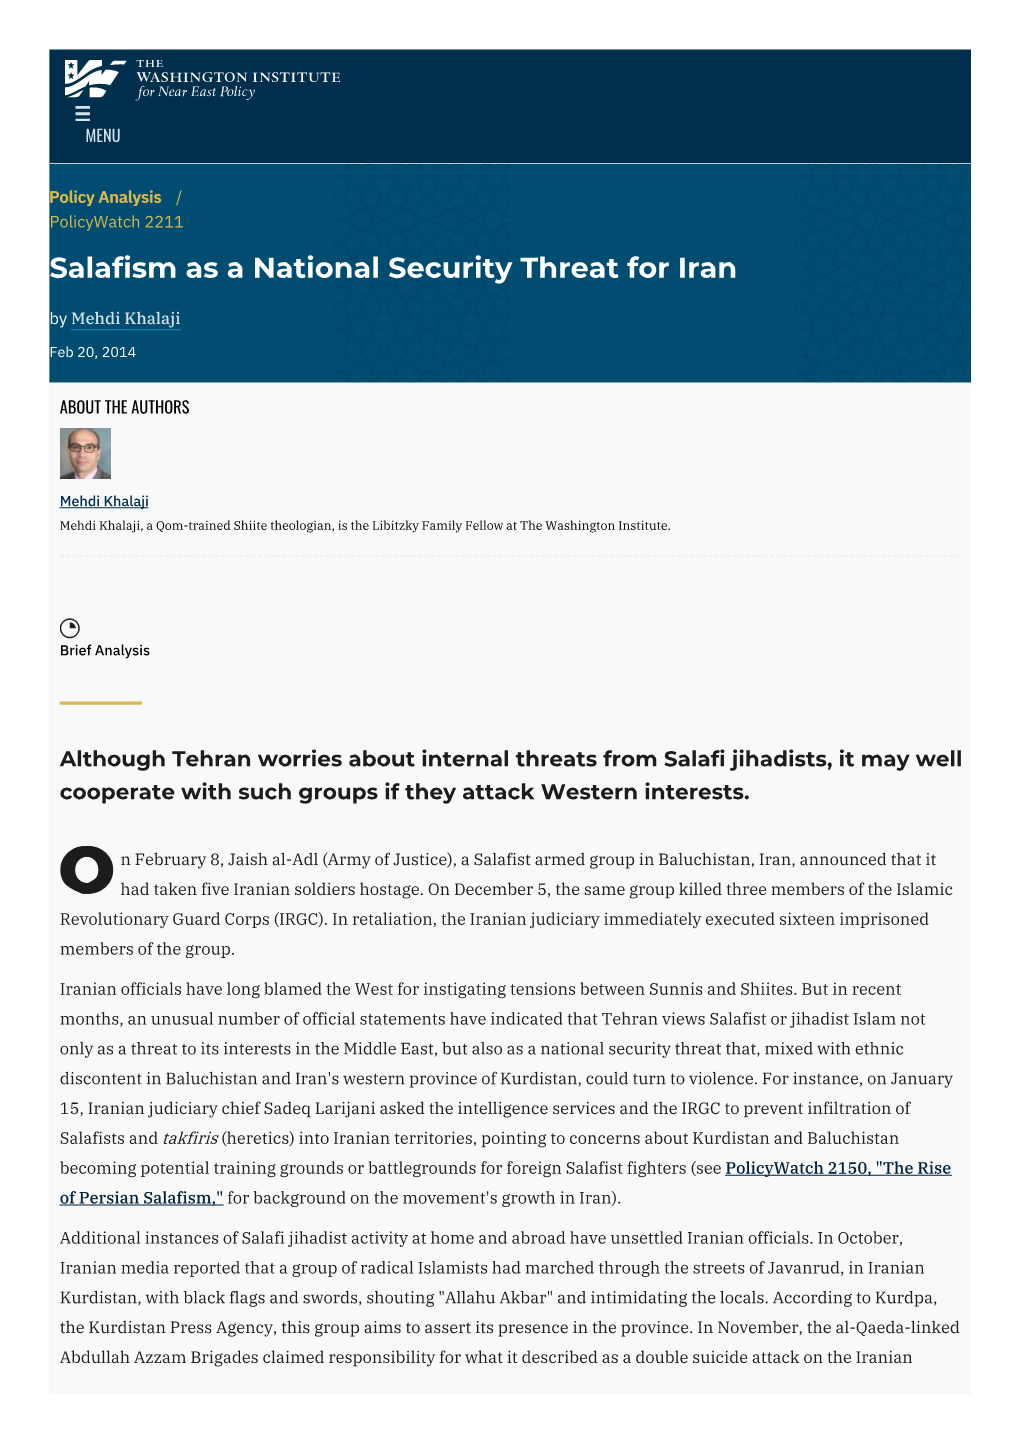 Salafism As a National Security Threat for Iran | the Washington Institute